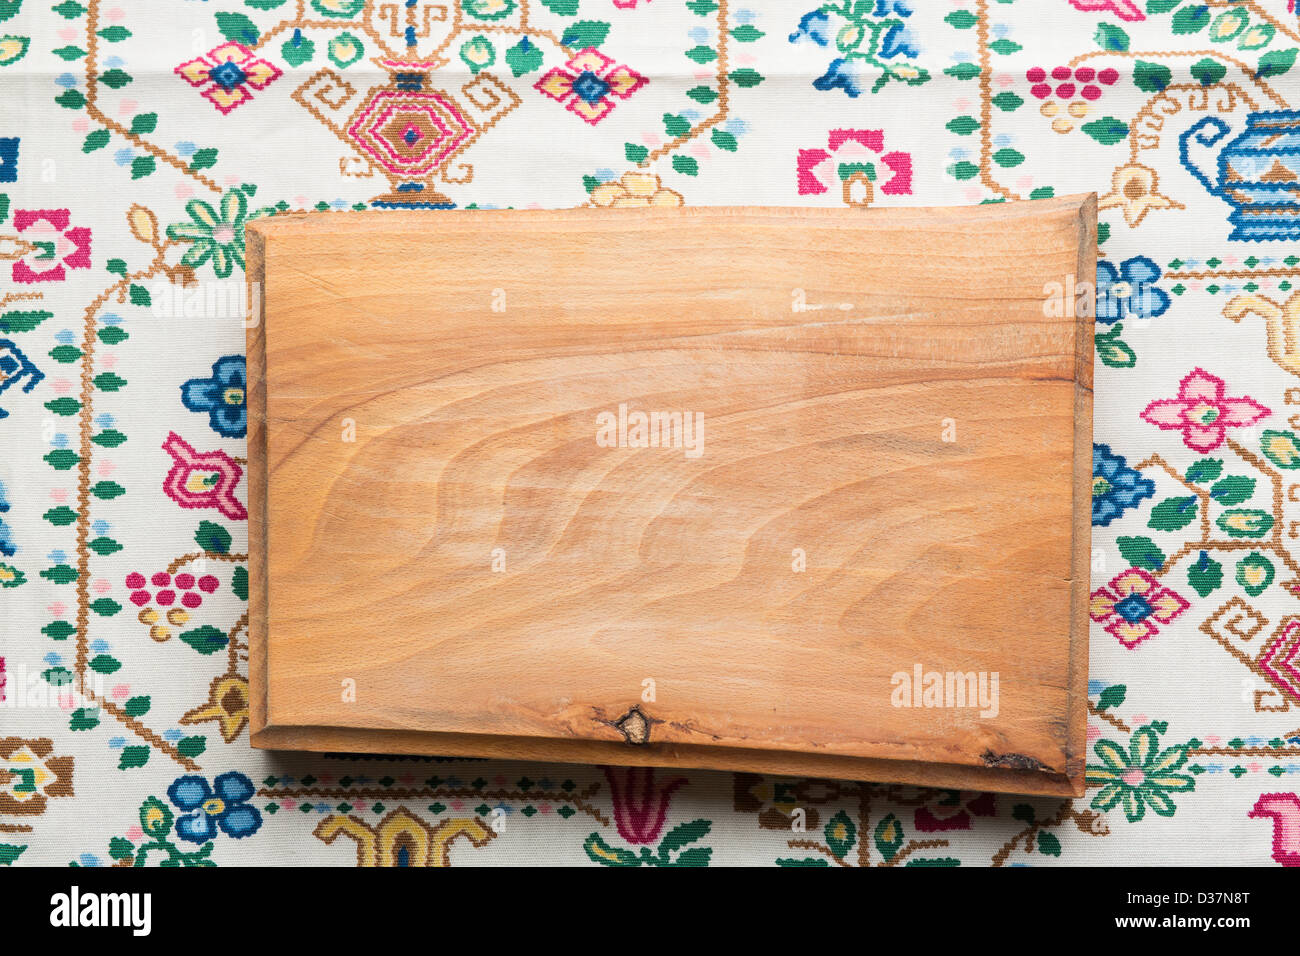 Natural wood chopping board on Danish folk fabric lit from the top of the frame with a drop shadow beneath the wooden block. Stock Photo